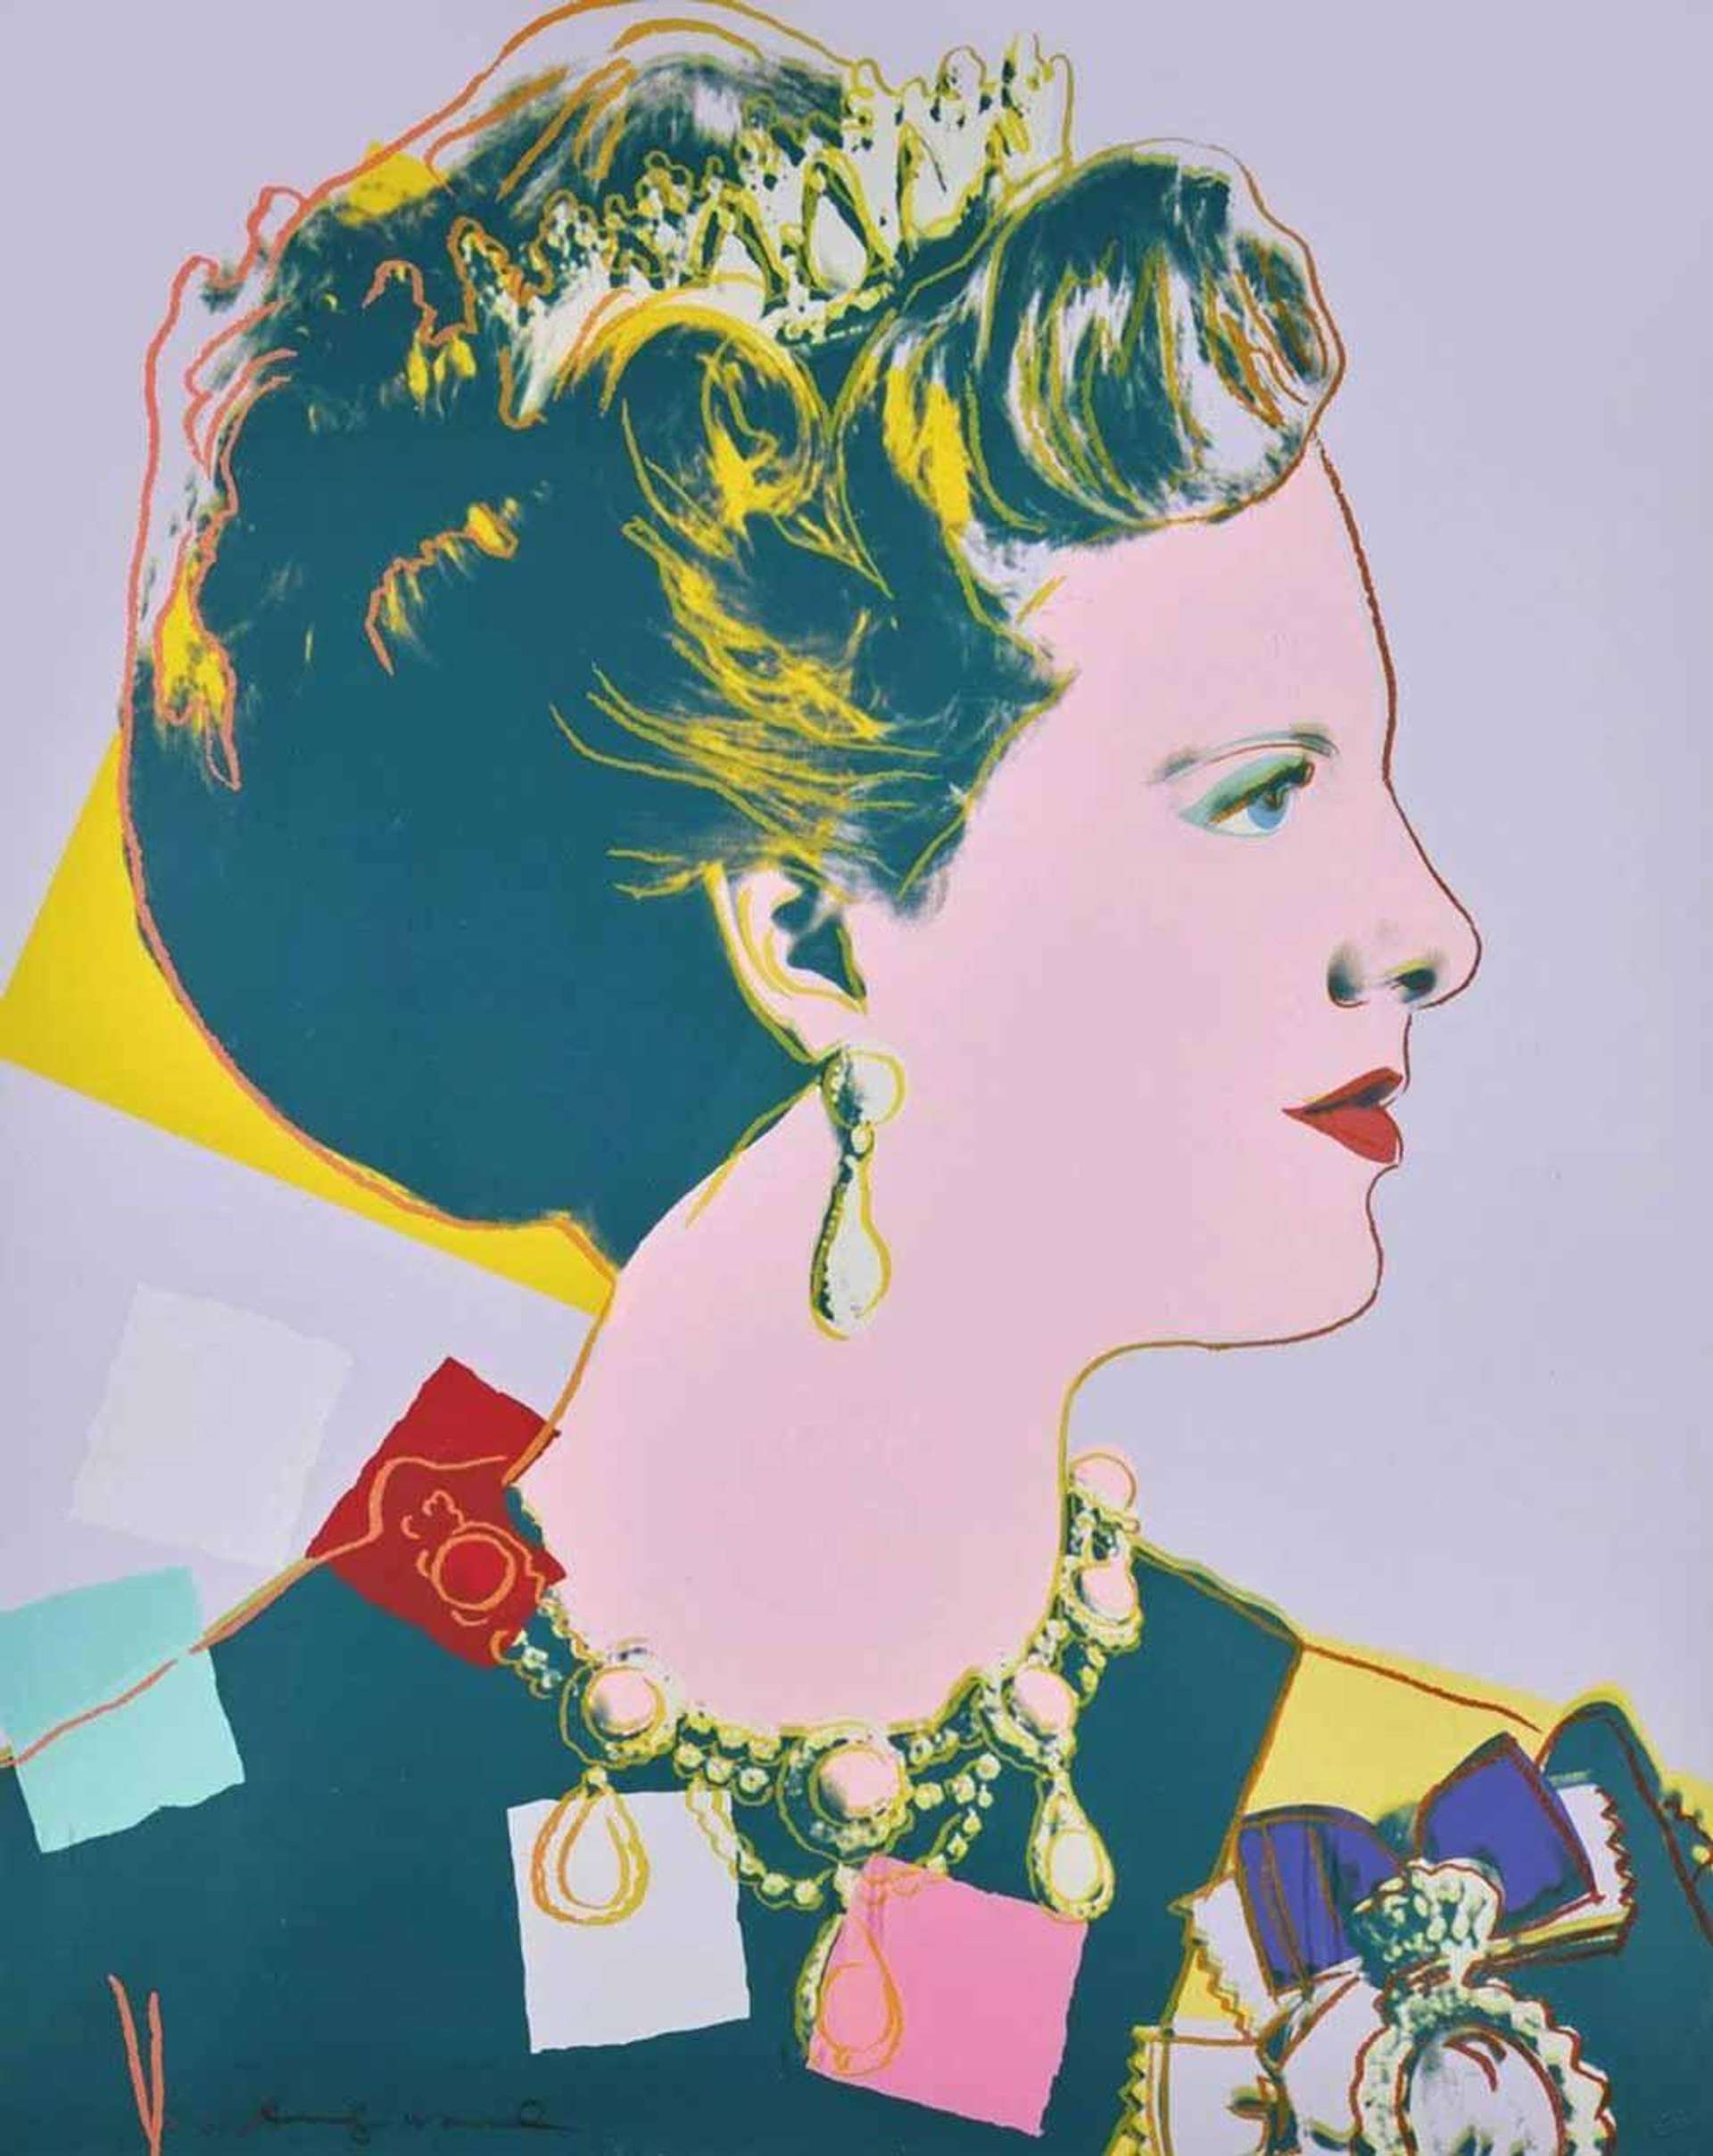 Queen Margrethe Of Denmark Royal Edition (F. & S. II.342A) - Signed Print by Andy Warhol 1985 - MyArtBroker